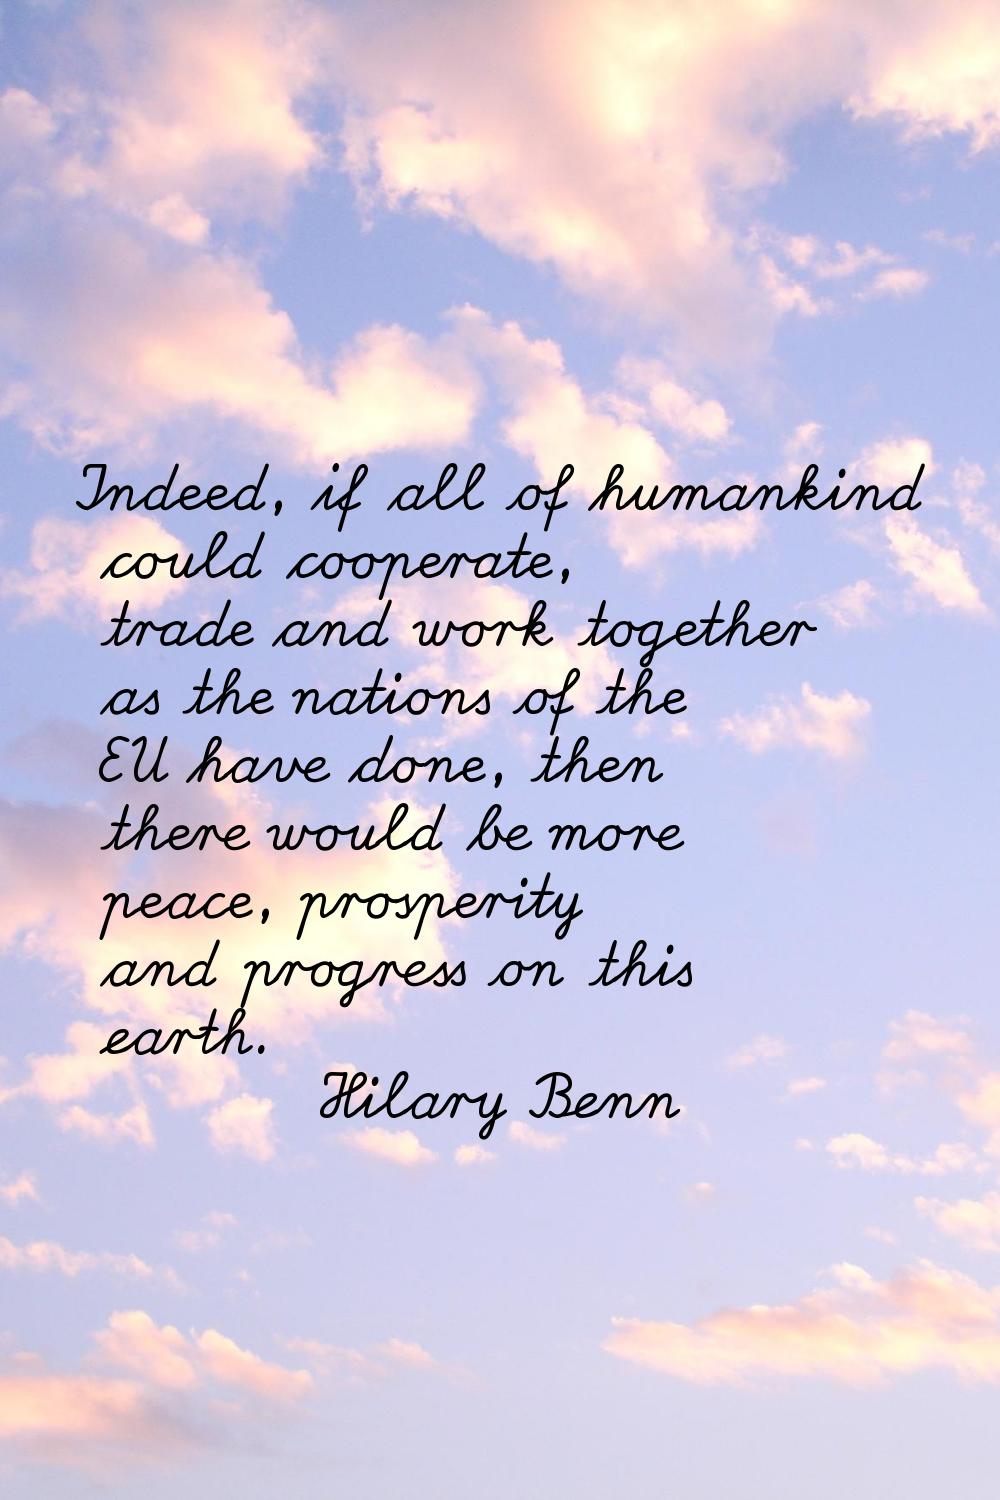 Indeed, if all of humankind could cooperate, trade and work together as the nations of the EU have 